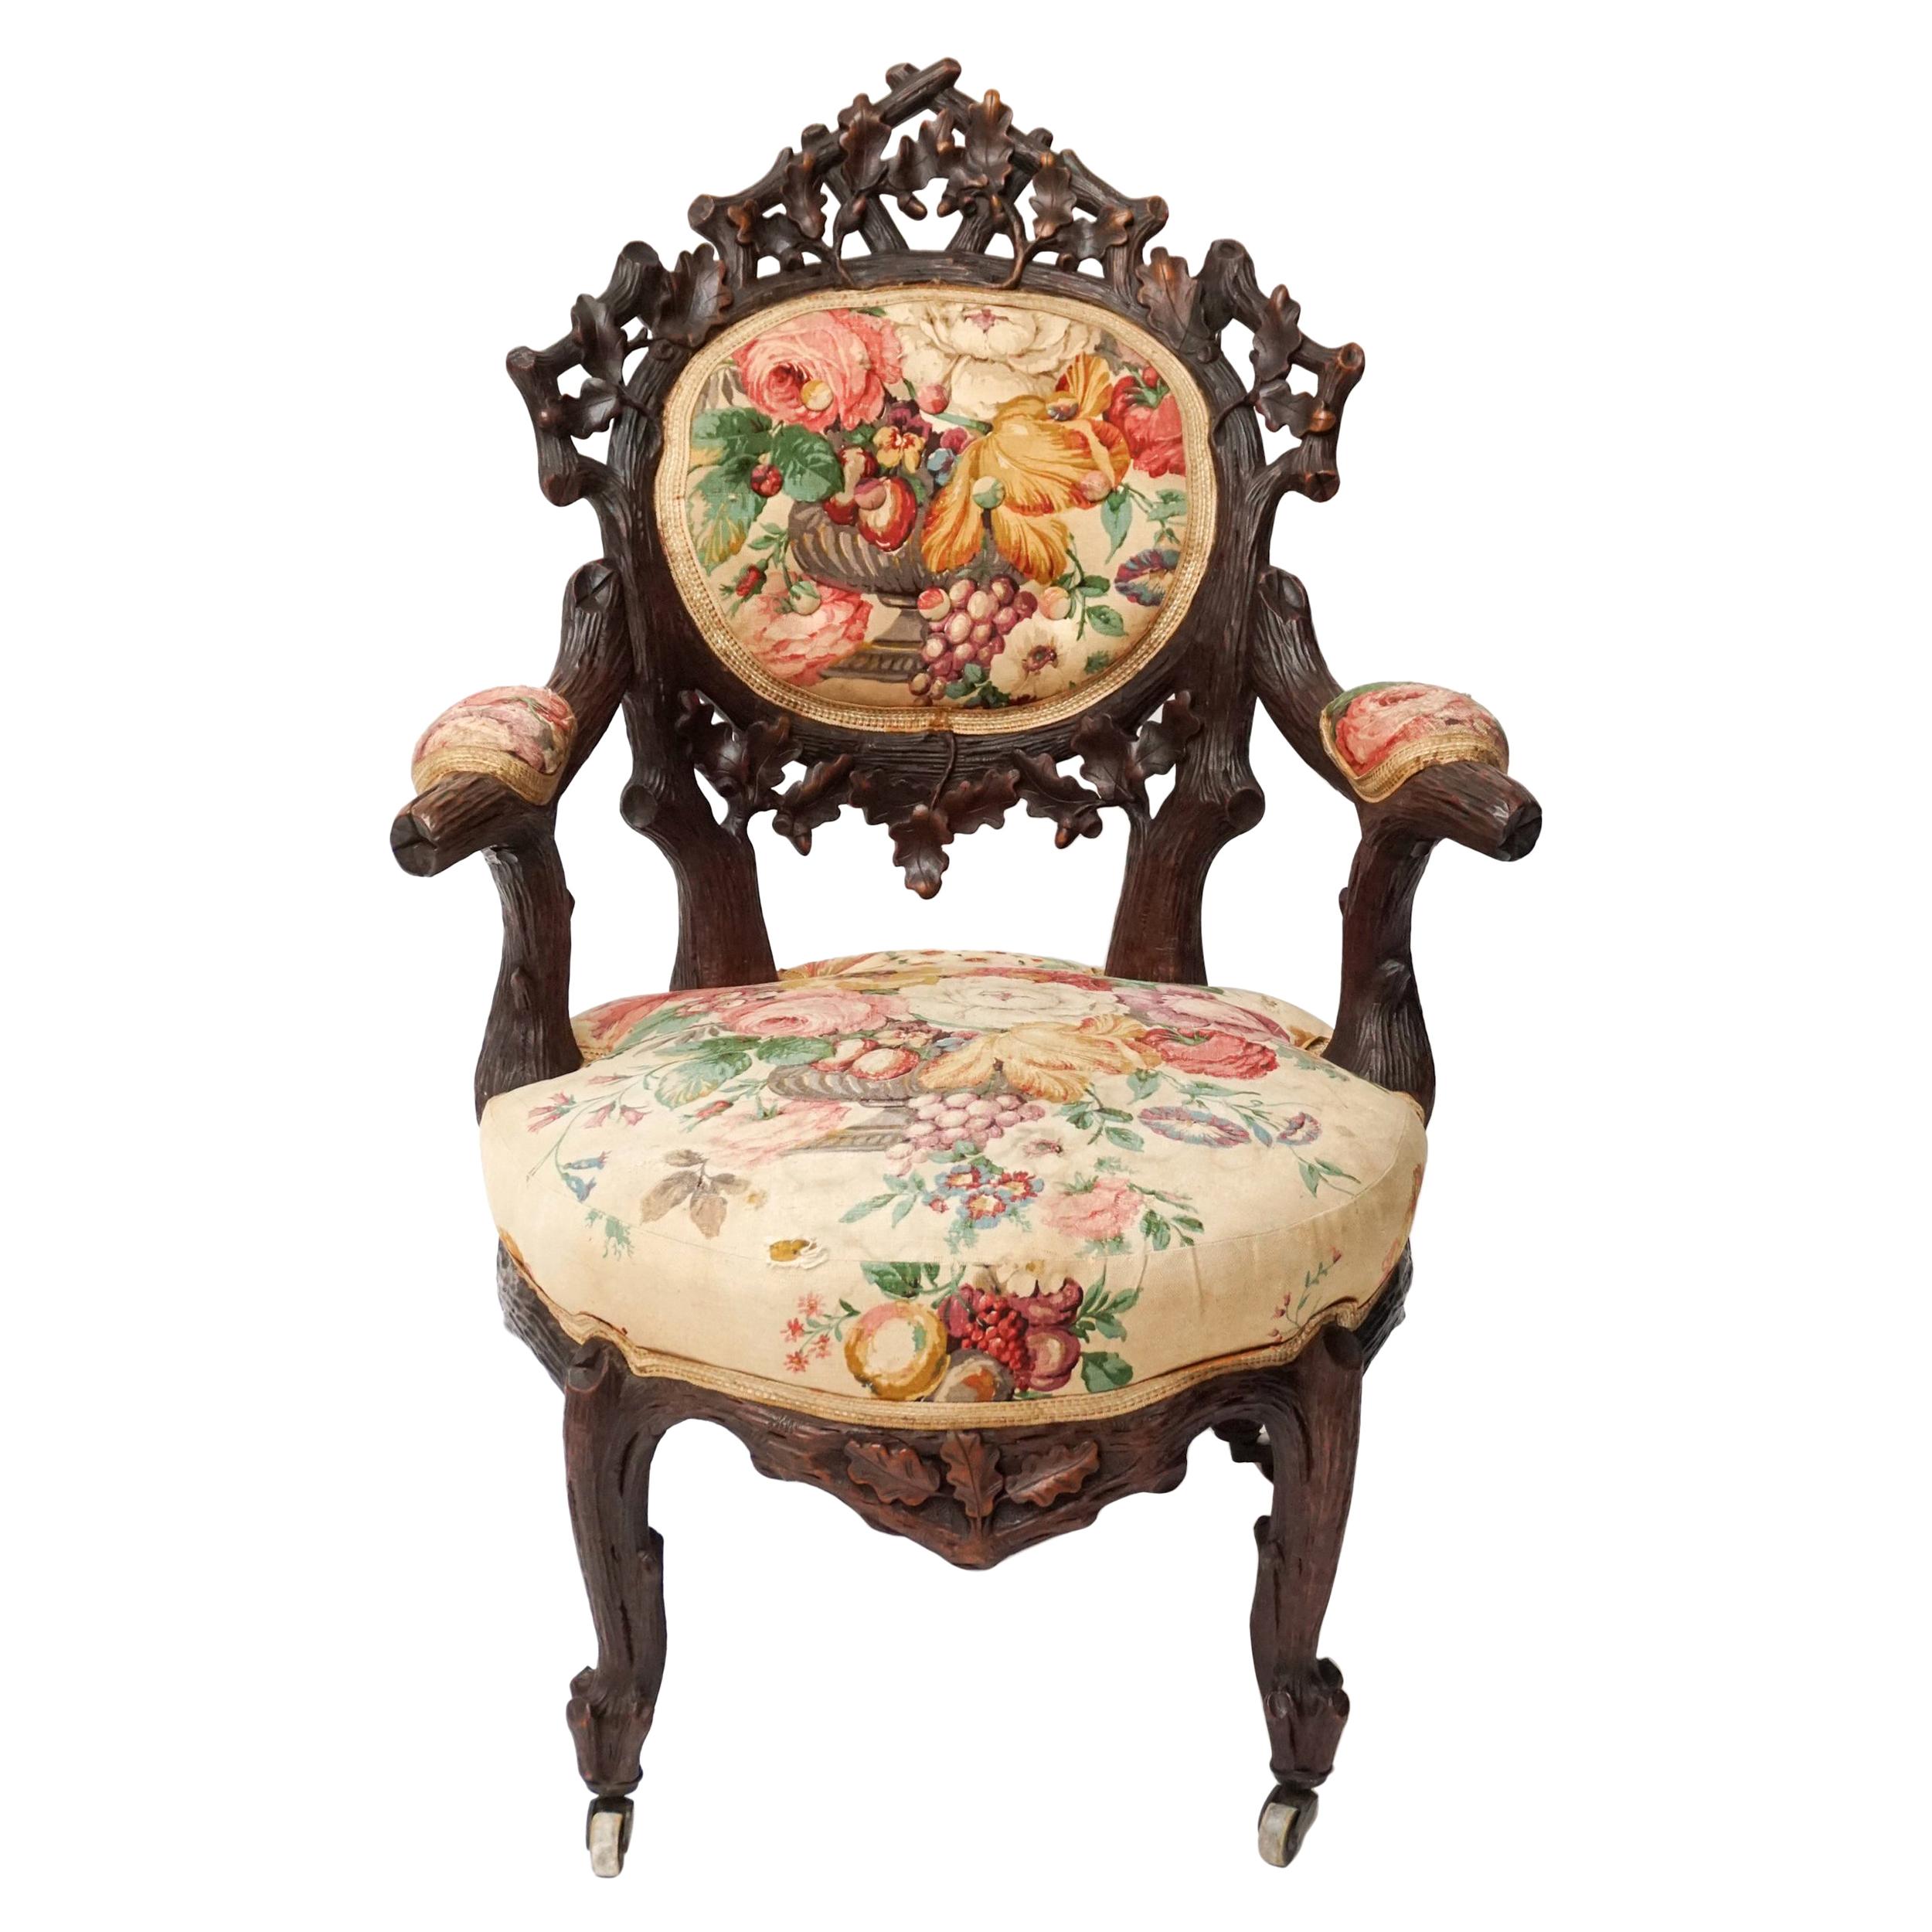 19th Century Swiss Black Forest Carved Walnut and Fabric Upholstered Armchair For Sale